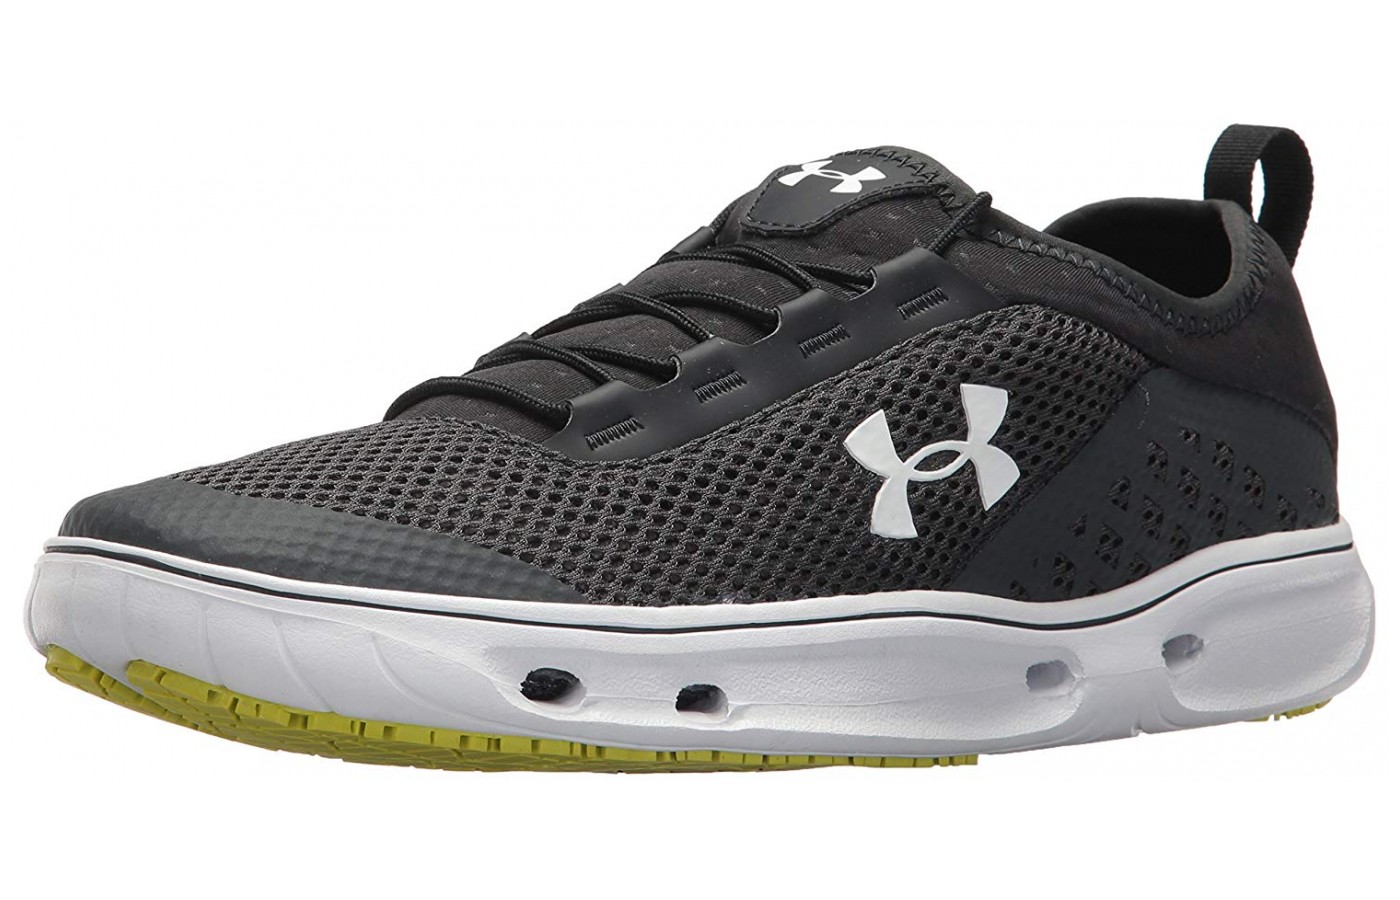 The Under Armour Kilchis is a great shoe option  for your next fishing trip. 